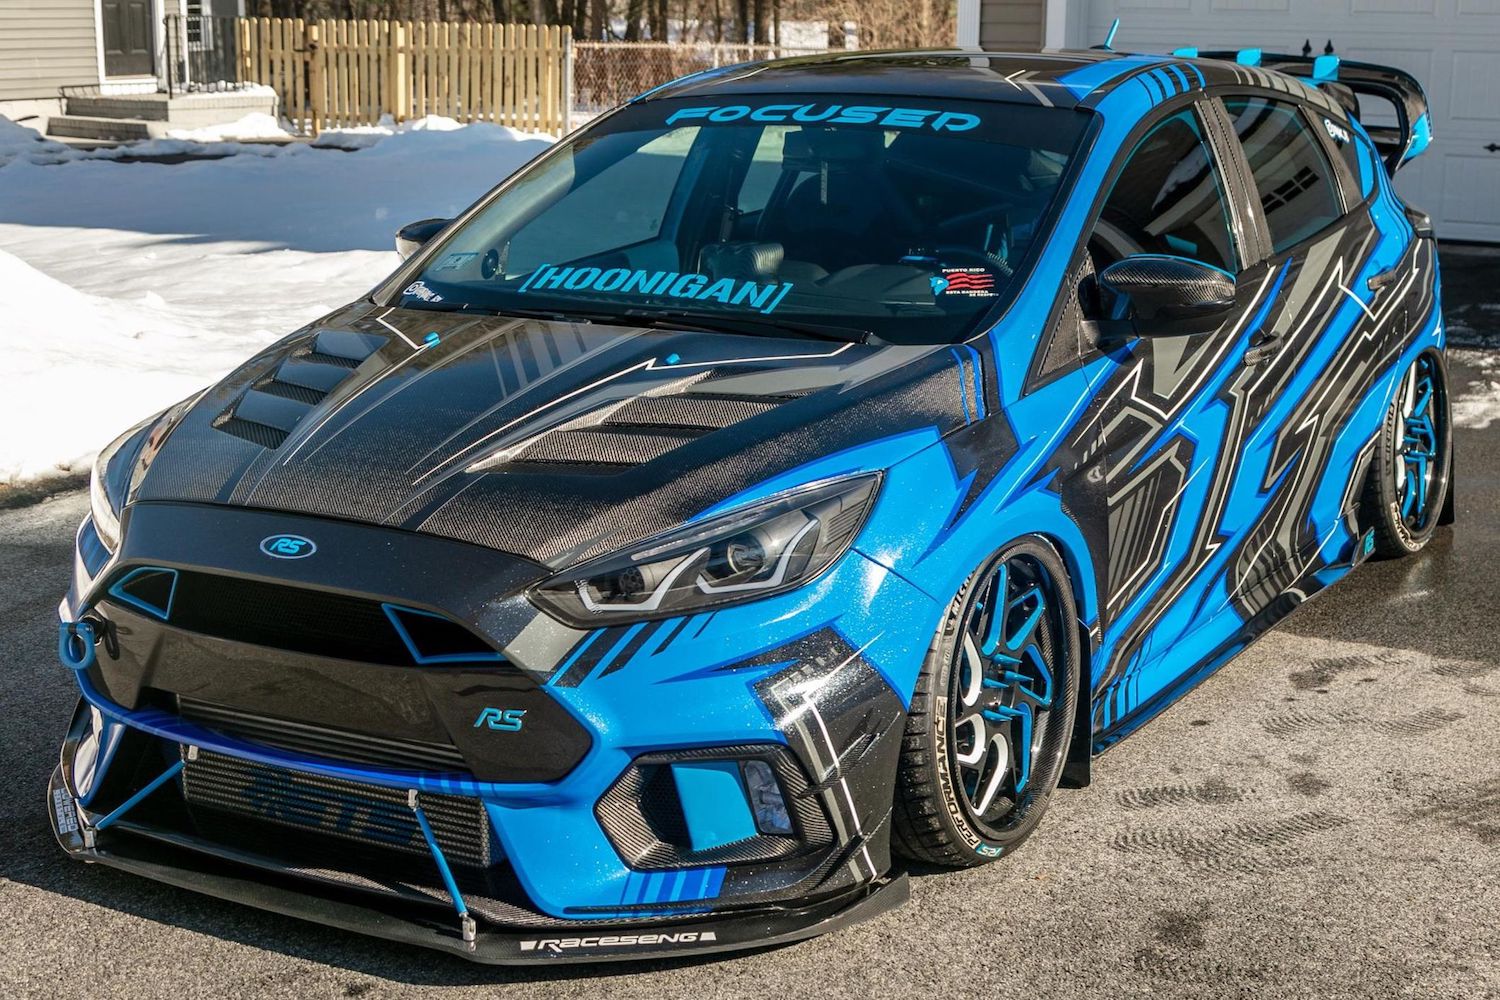 https://fordauthority.com/wp-content/uploads/2022/03/2017-Ford-Focus-RS-Exterior-001-Front-Three-Quarters.jpg